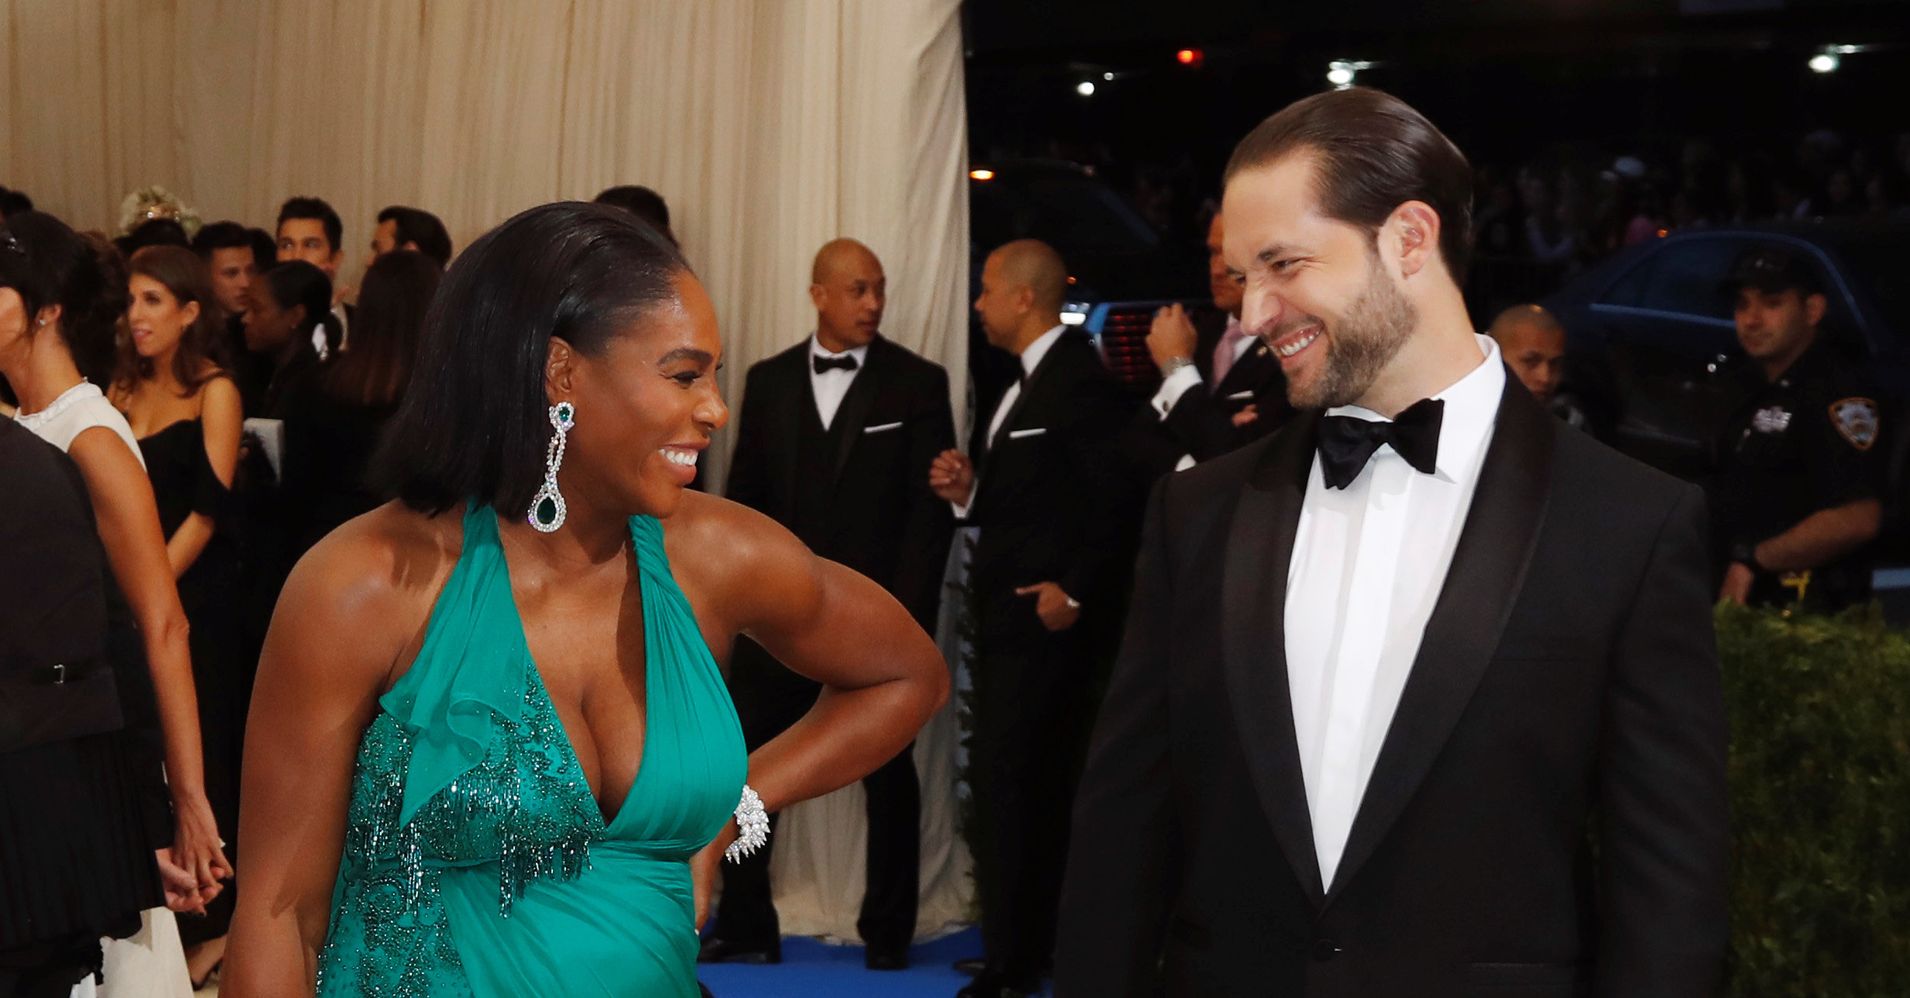 Serena Williams' First Words To Her Fiancé Will Make You Cringe | HuffPost